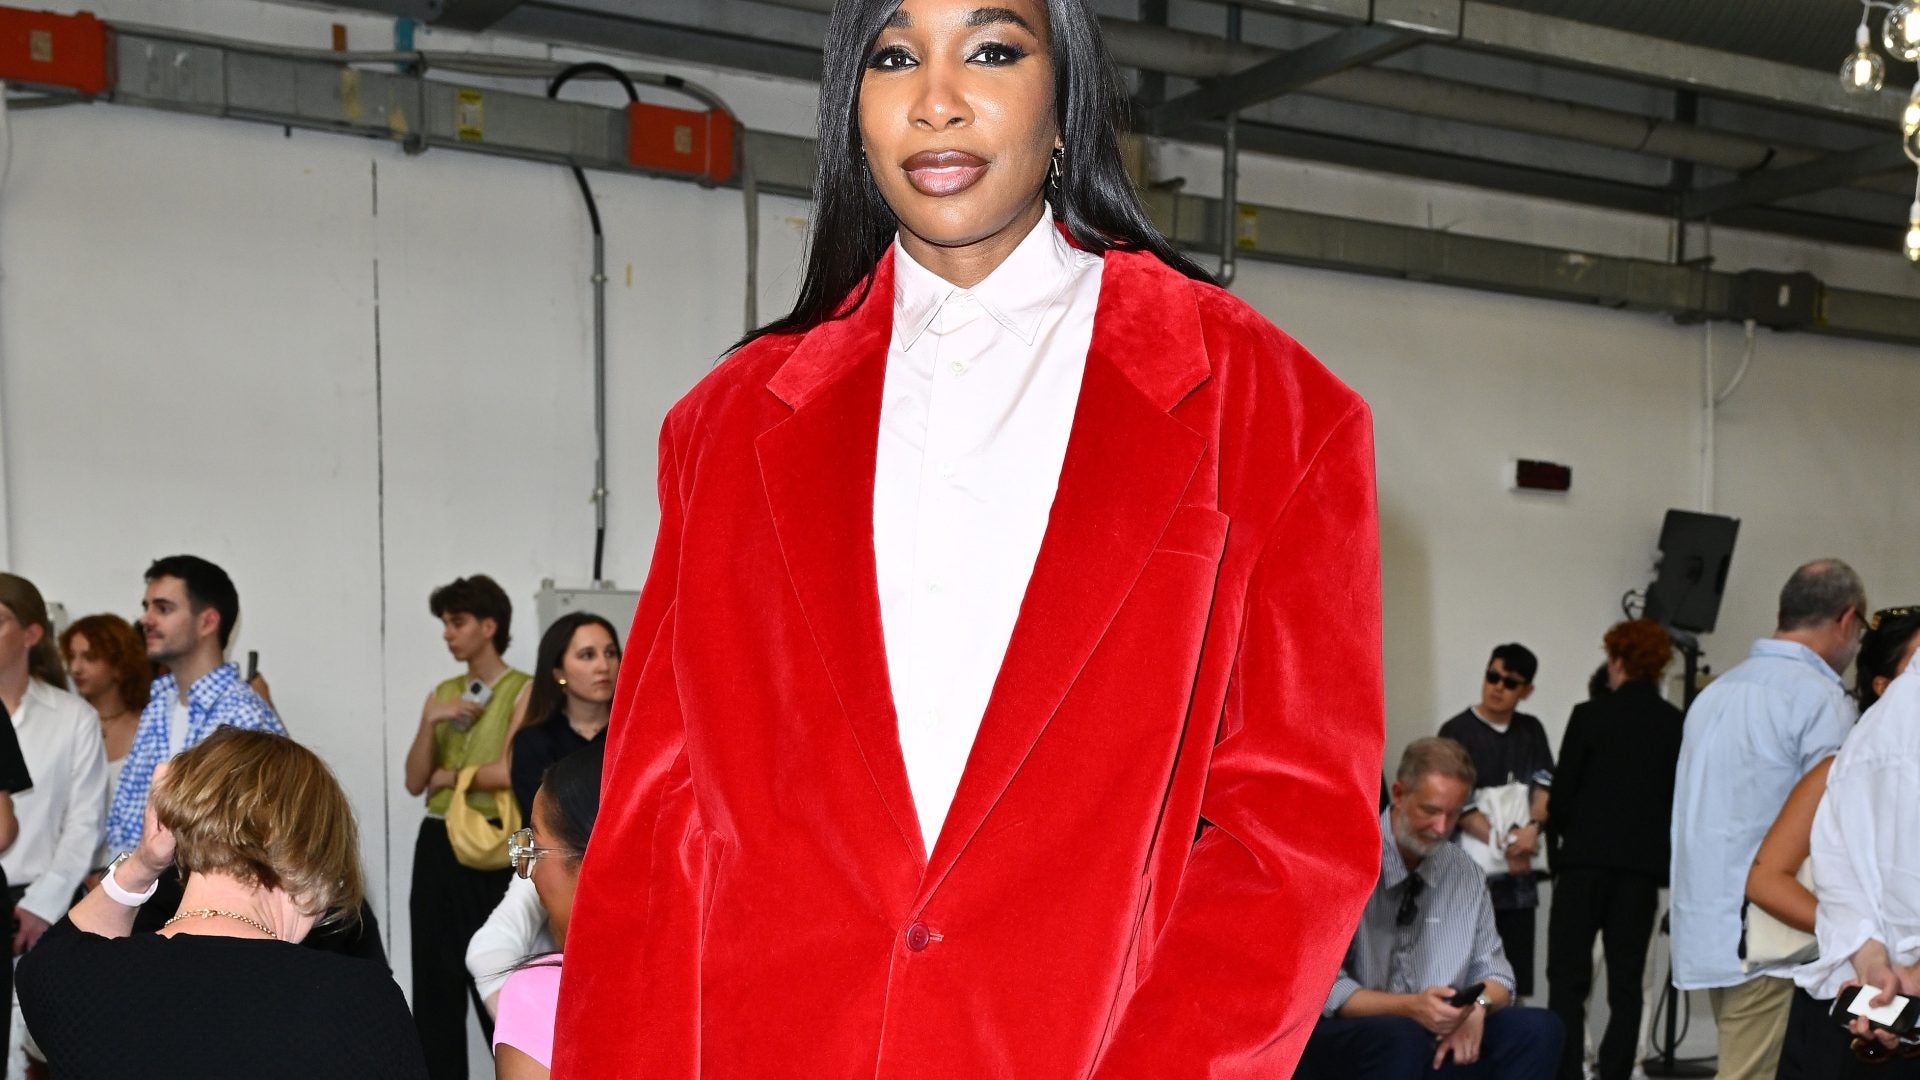 In Case You Missed It: Venus Williams Stuns In JW Anderson, Martine Rose Debuts In Milan, And More